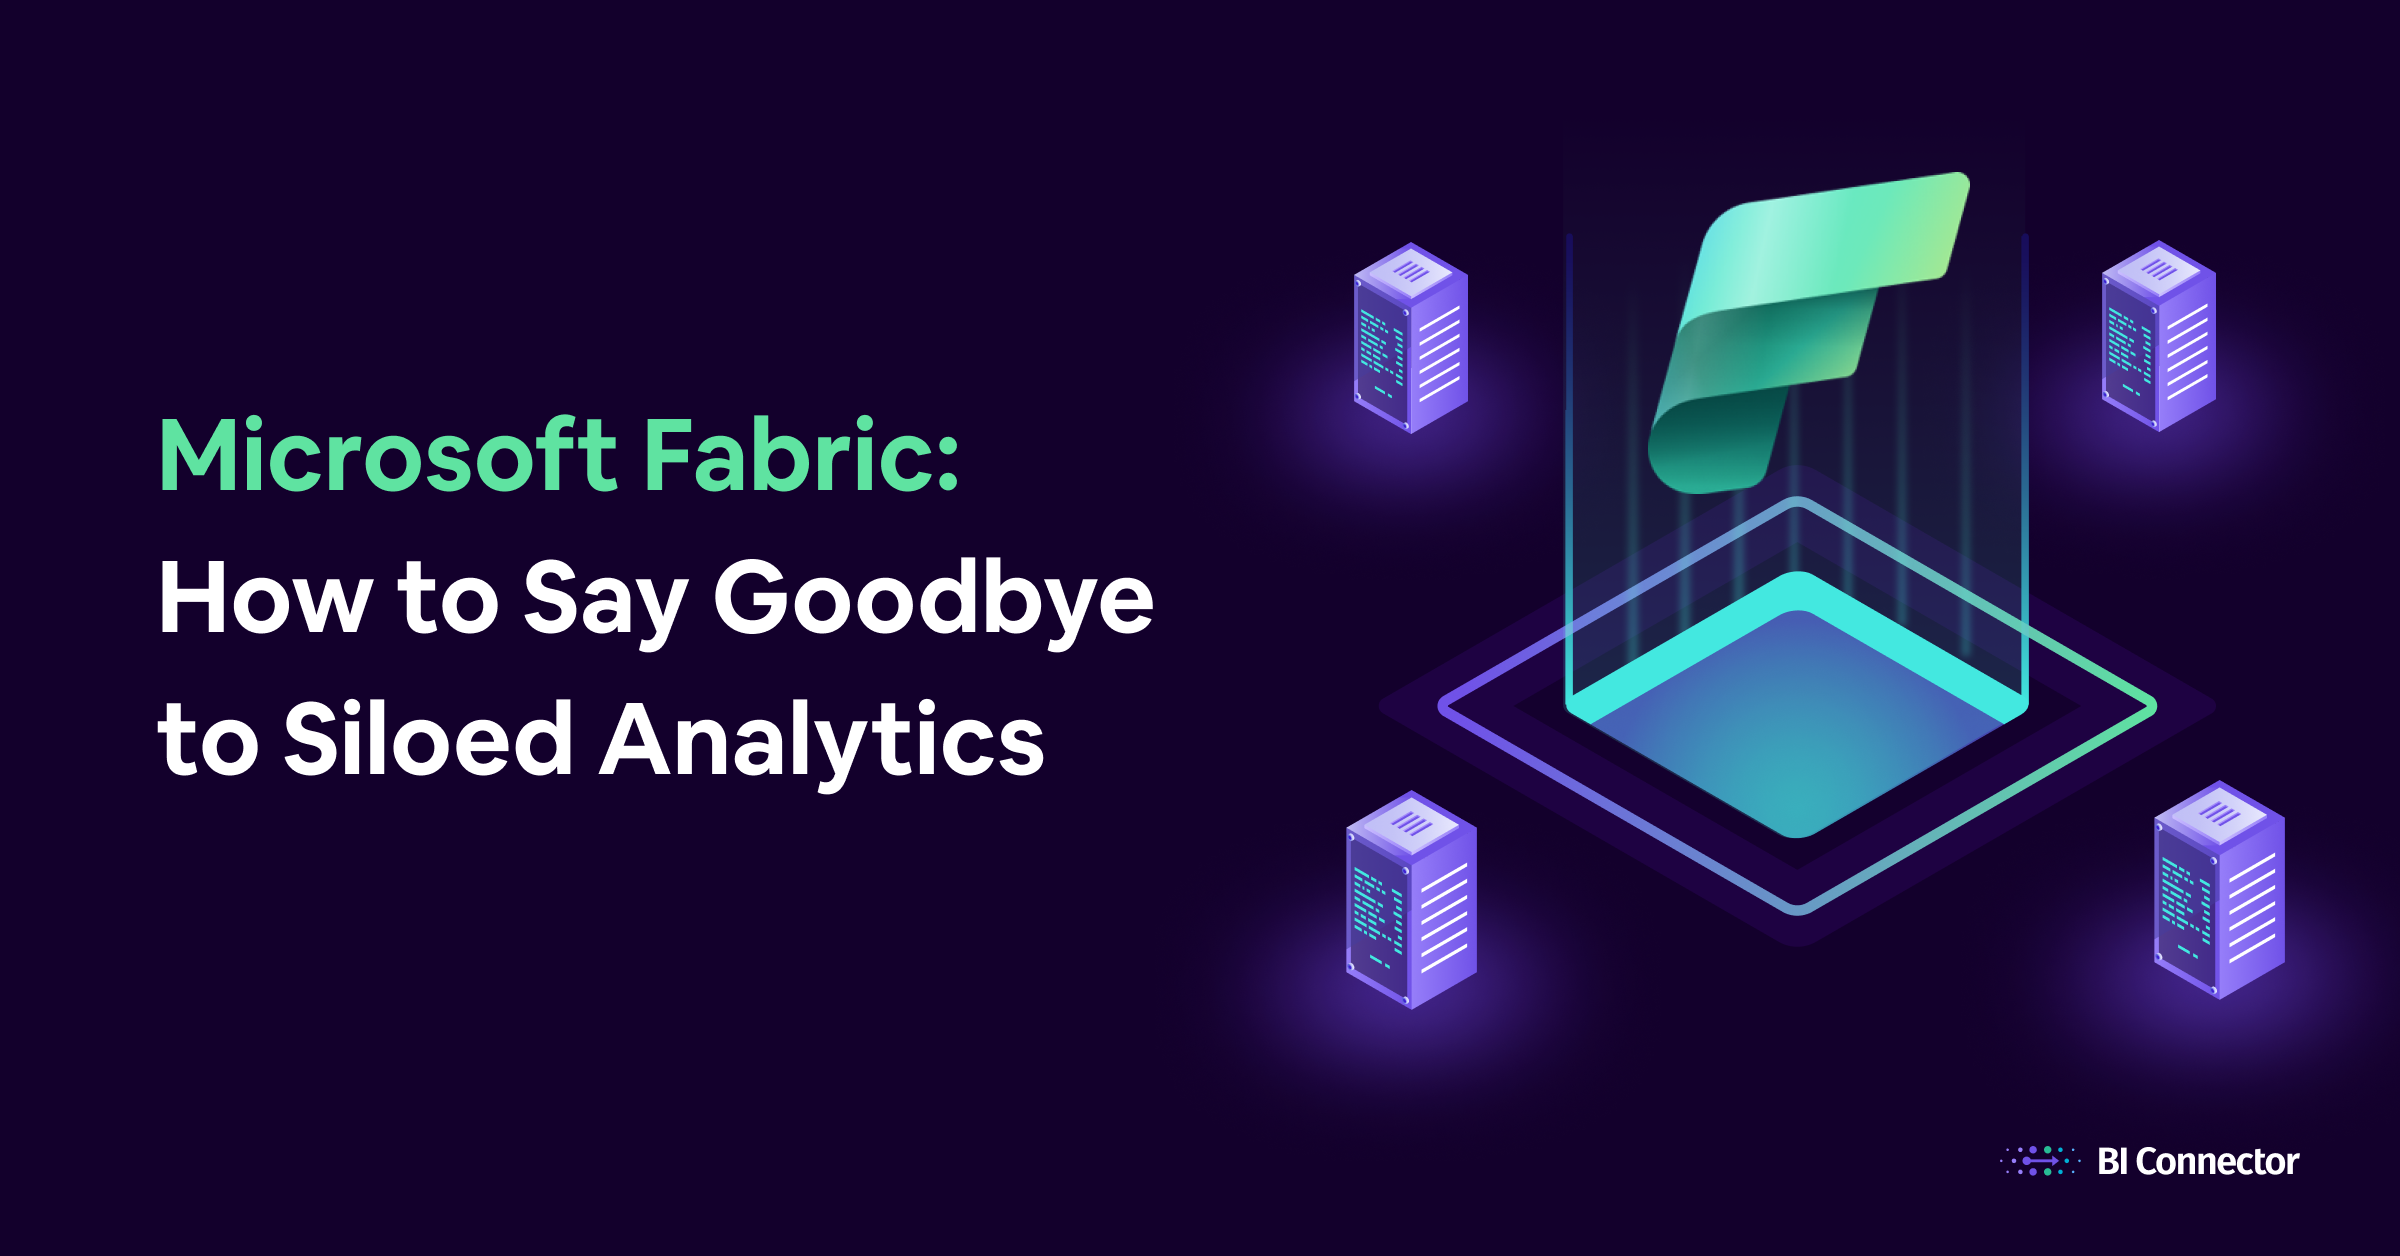 Microsoft Fabric and its features How to Say Goodbye to Siloed Analytics